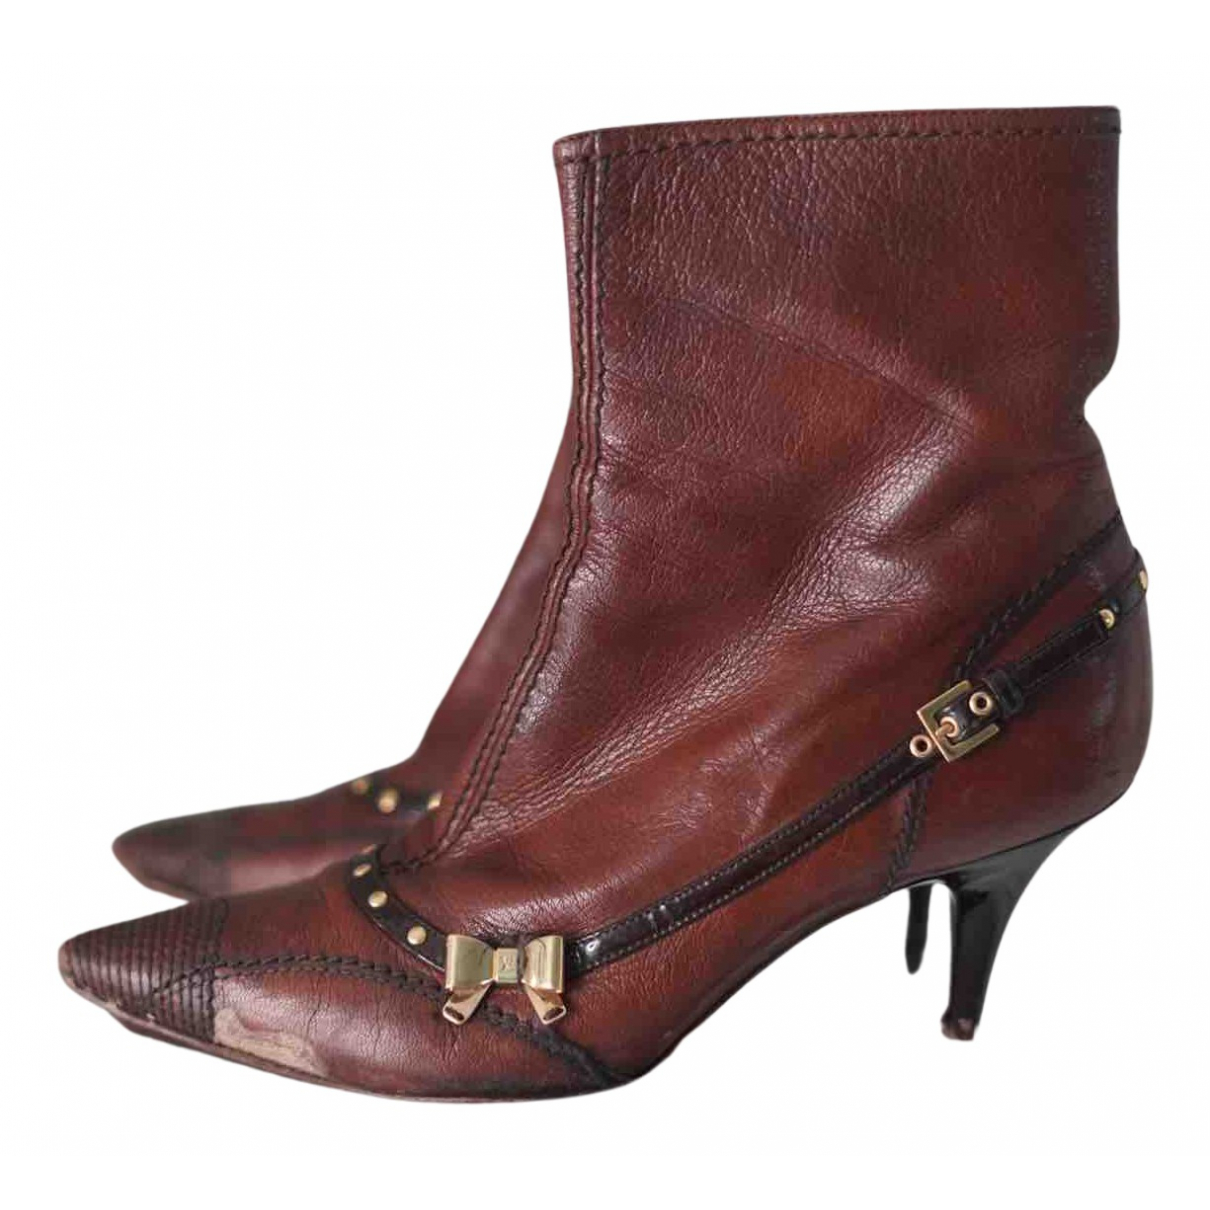 Leather ankle excellence boots NEW before selling